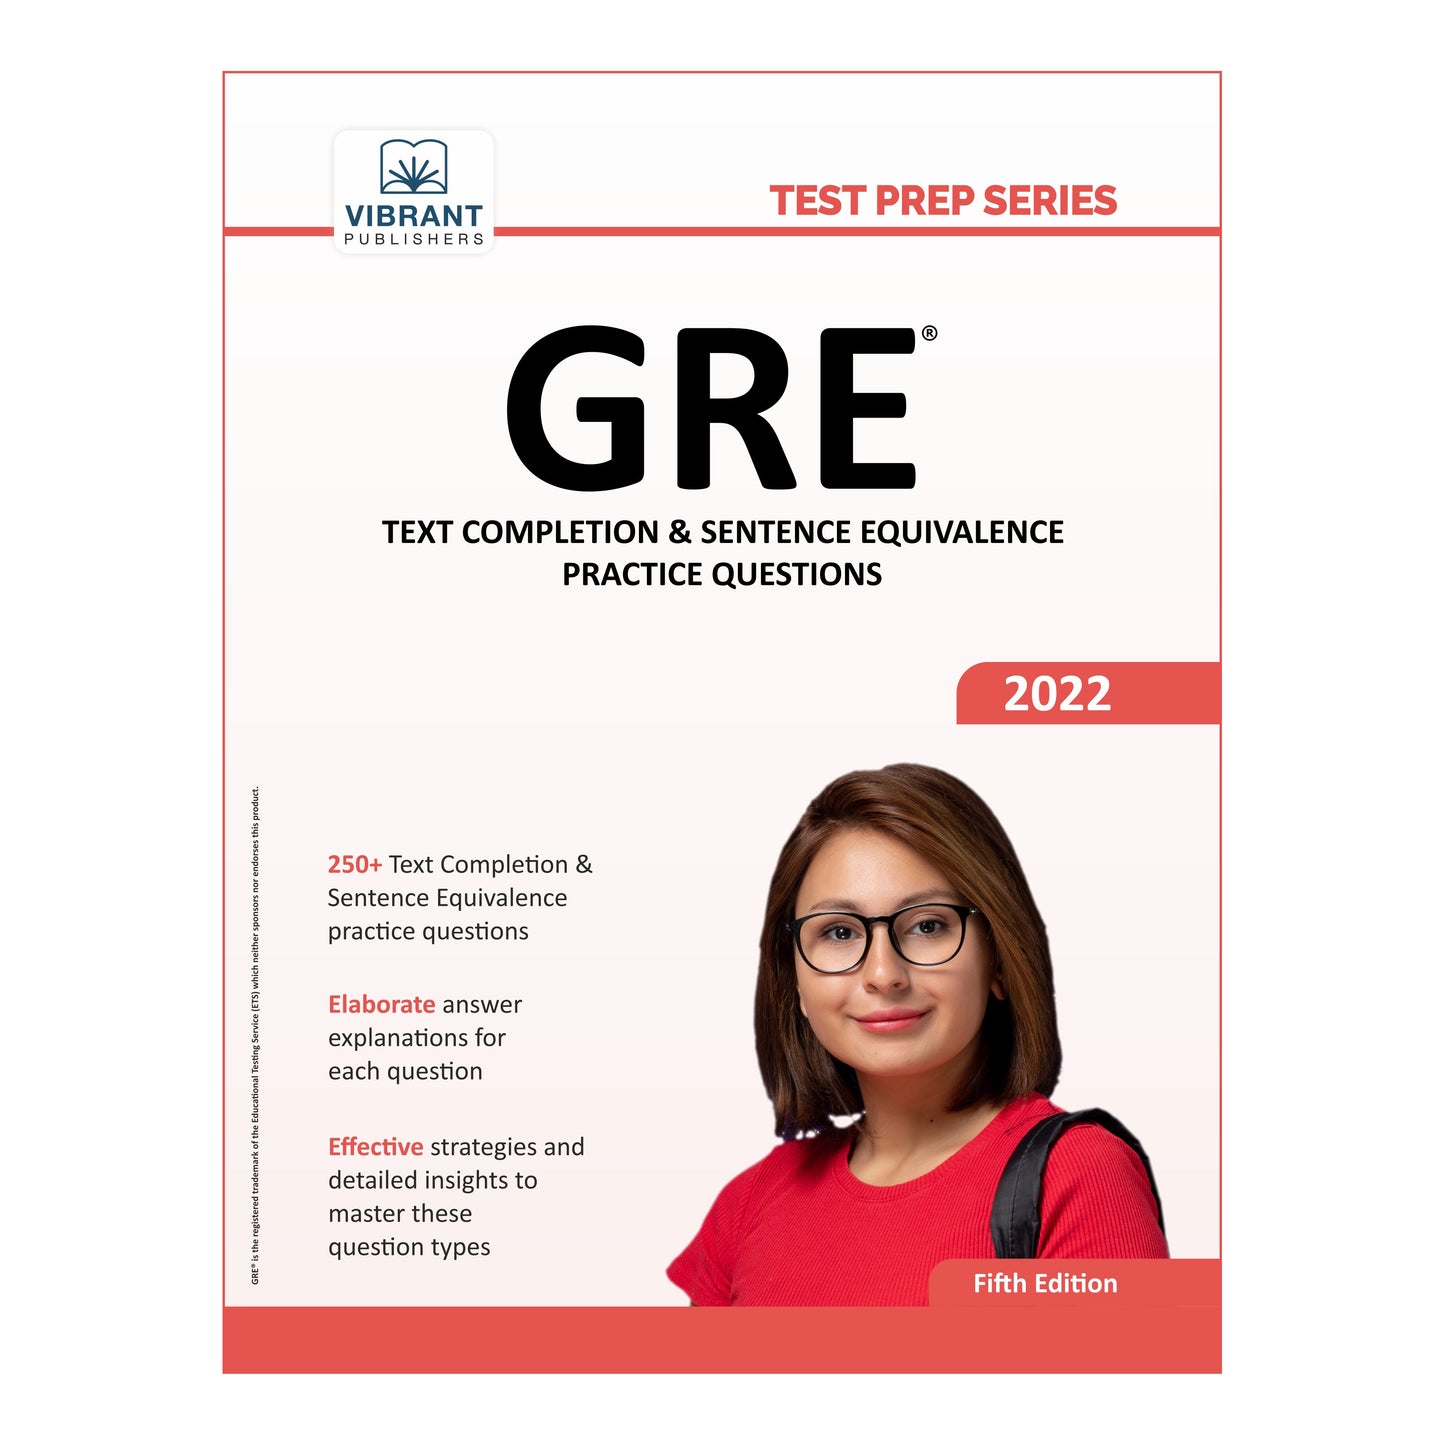 GRE Text Completion and Sentence Equivalence Practice Questions (2022 Edition)